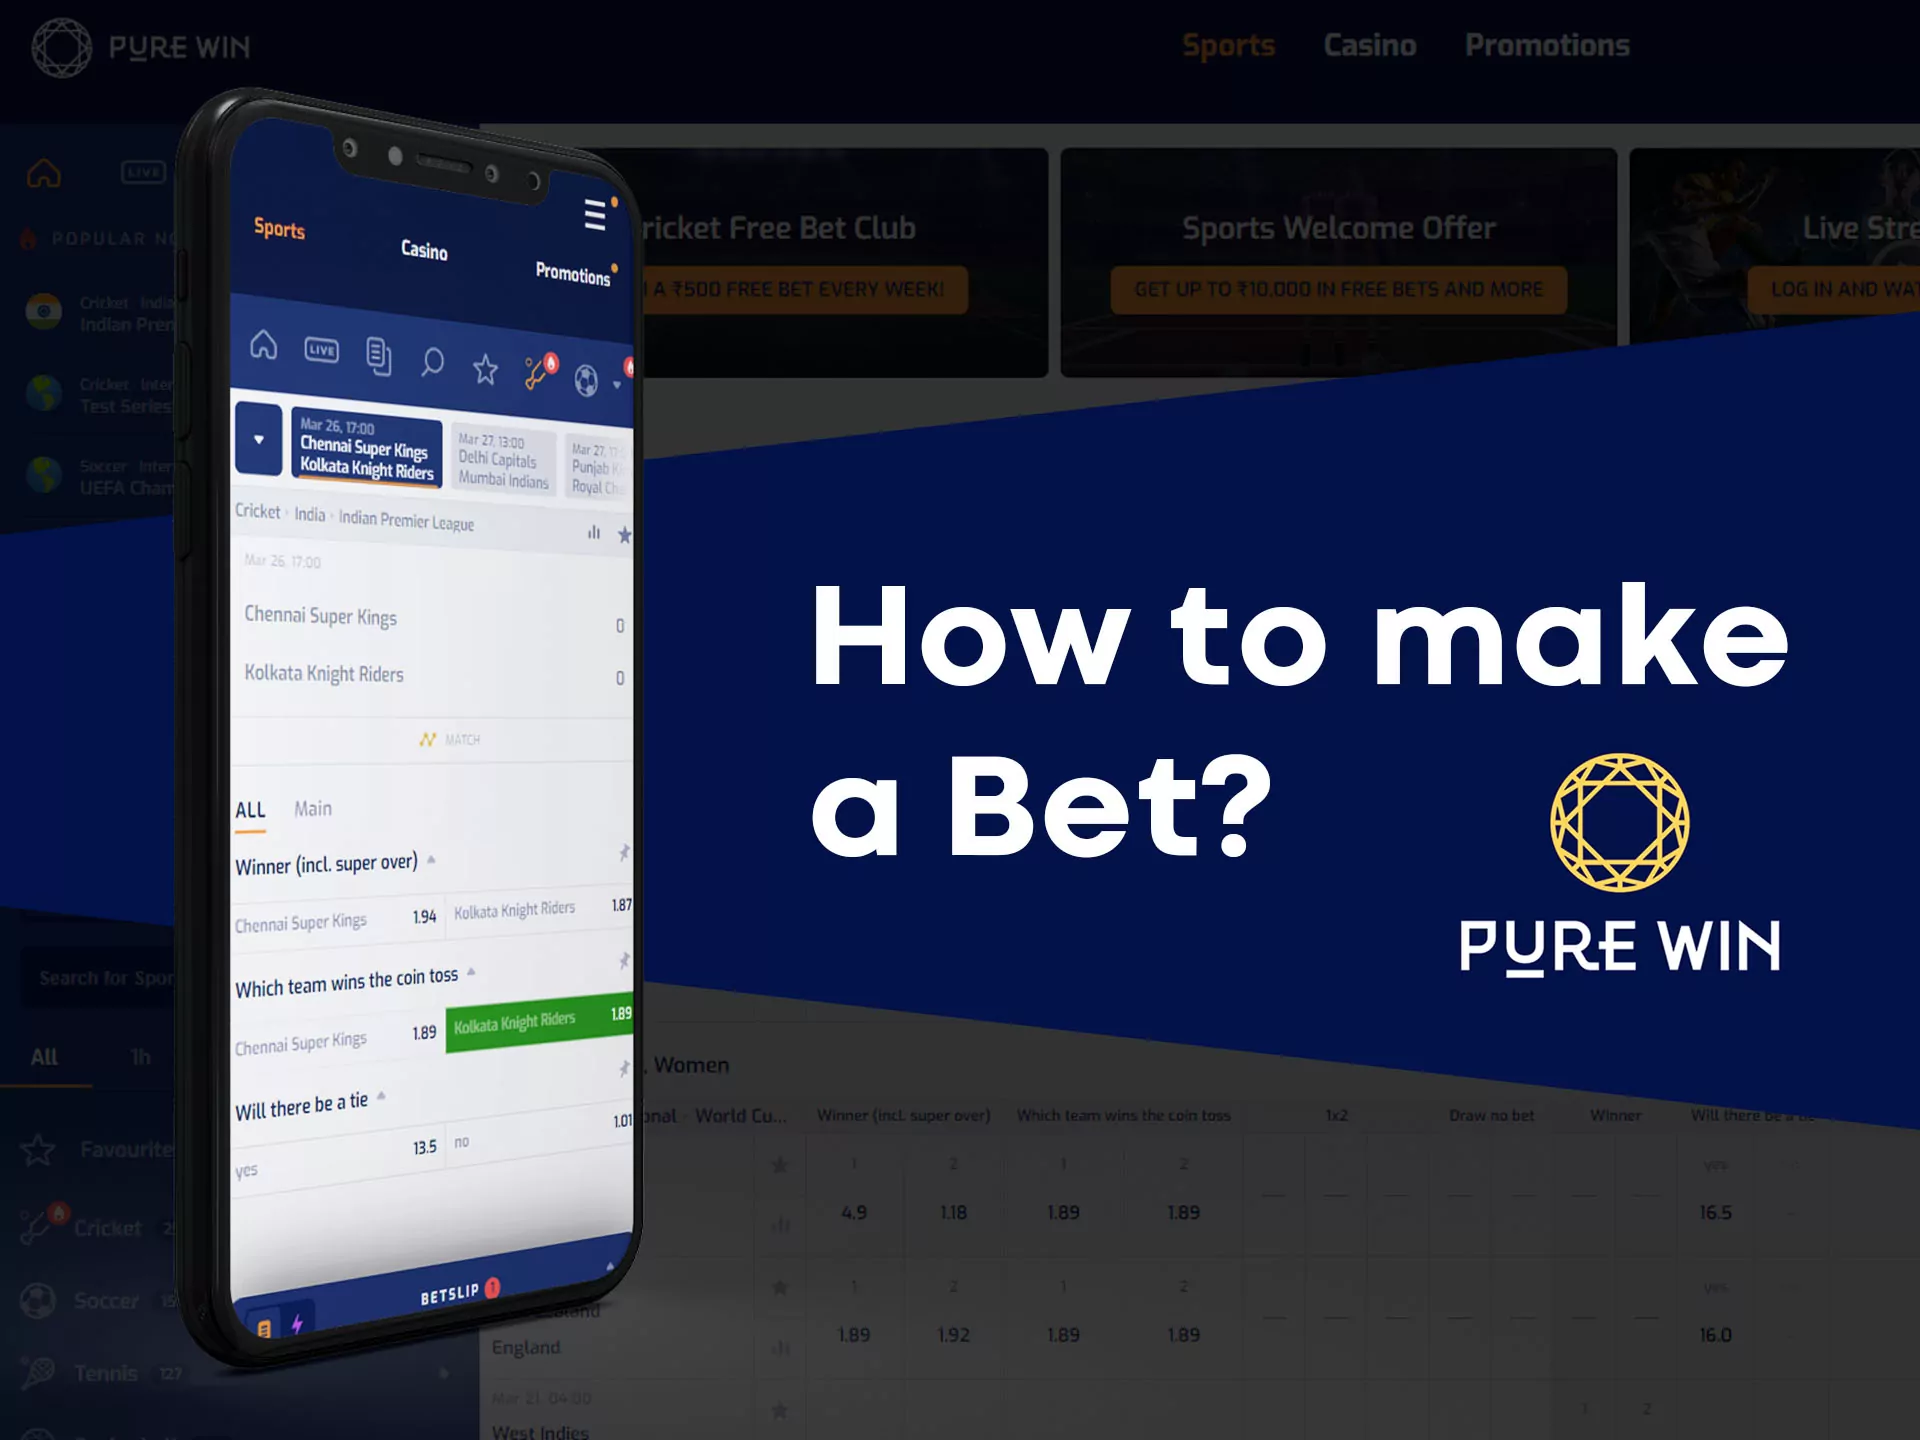 You can place your first bets on Pure Win.